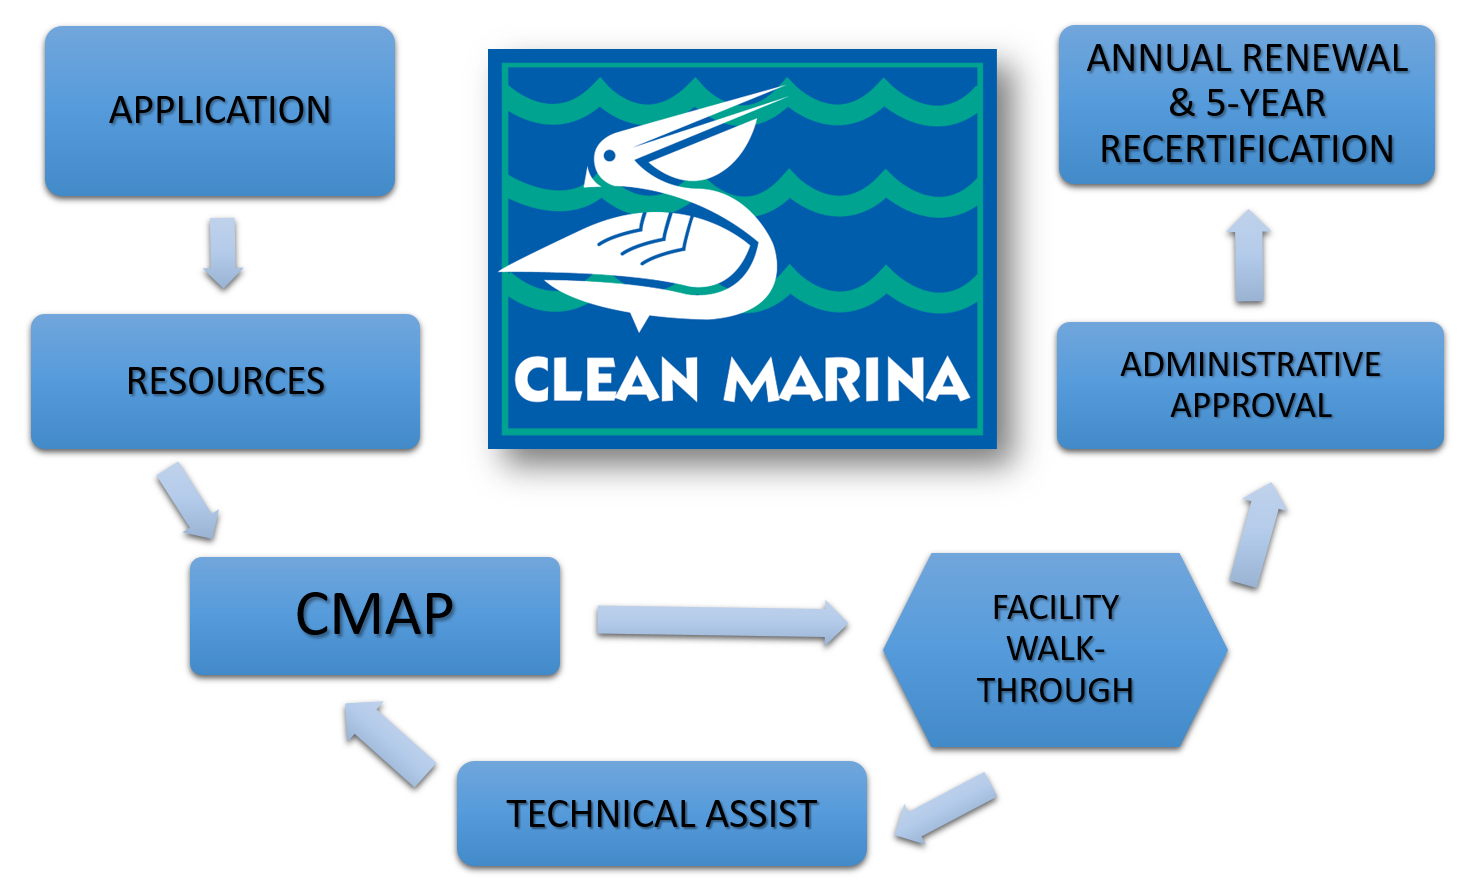 A flowchart depicting the cycle to receive Clean Marina designation form the initial application to annual renewal and 5-year recertification